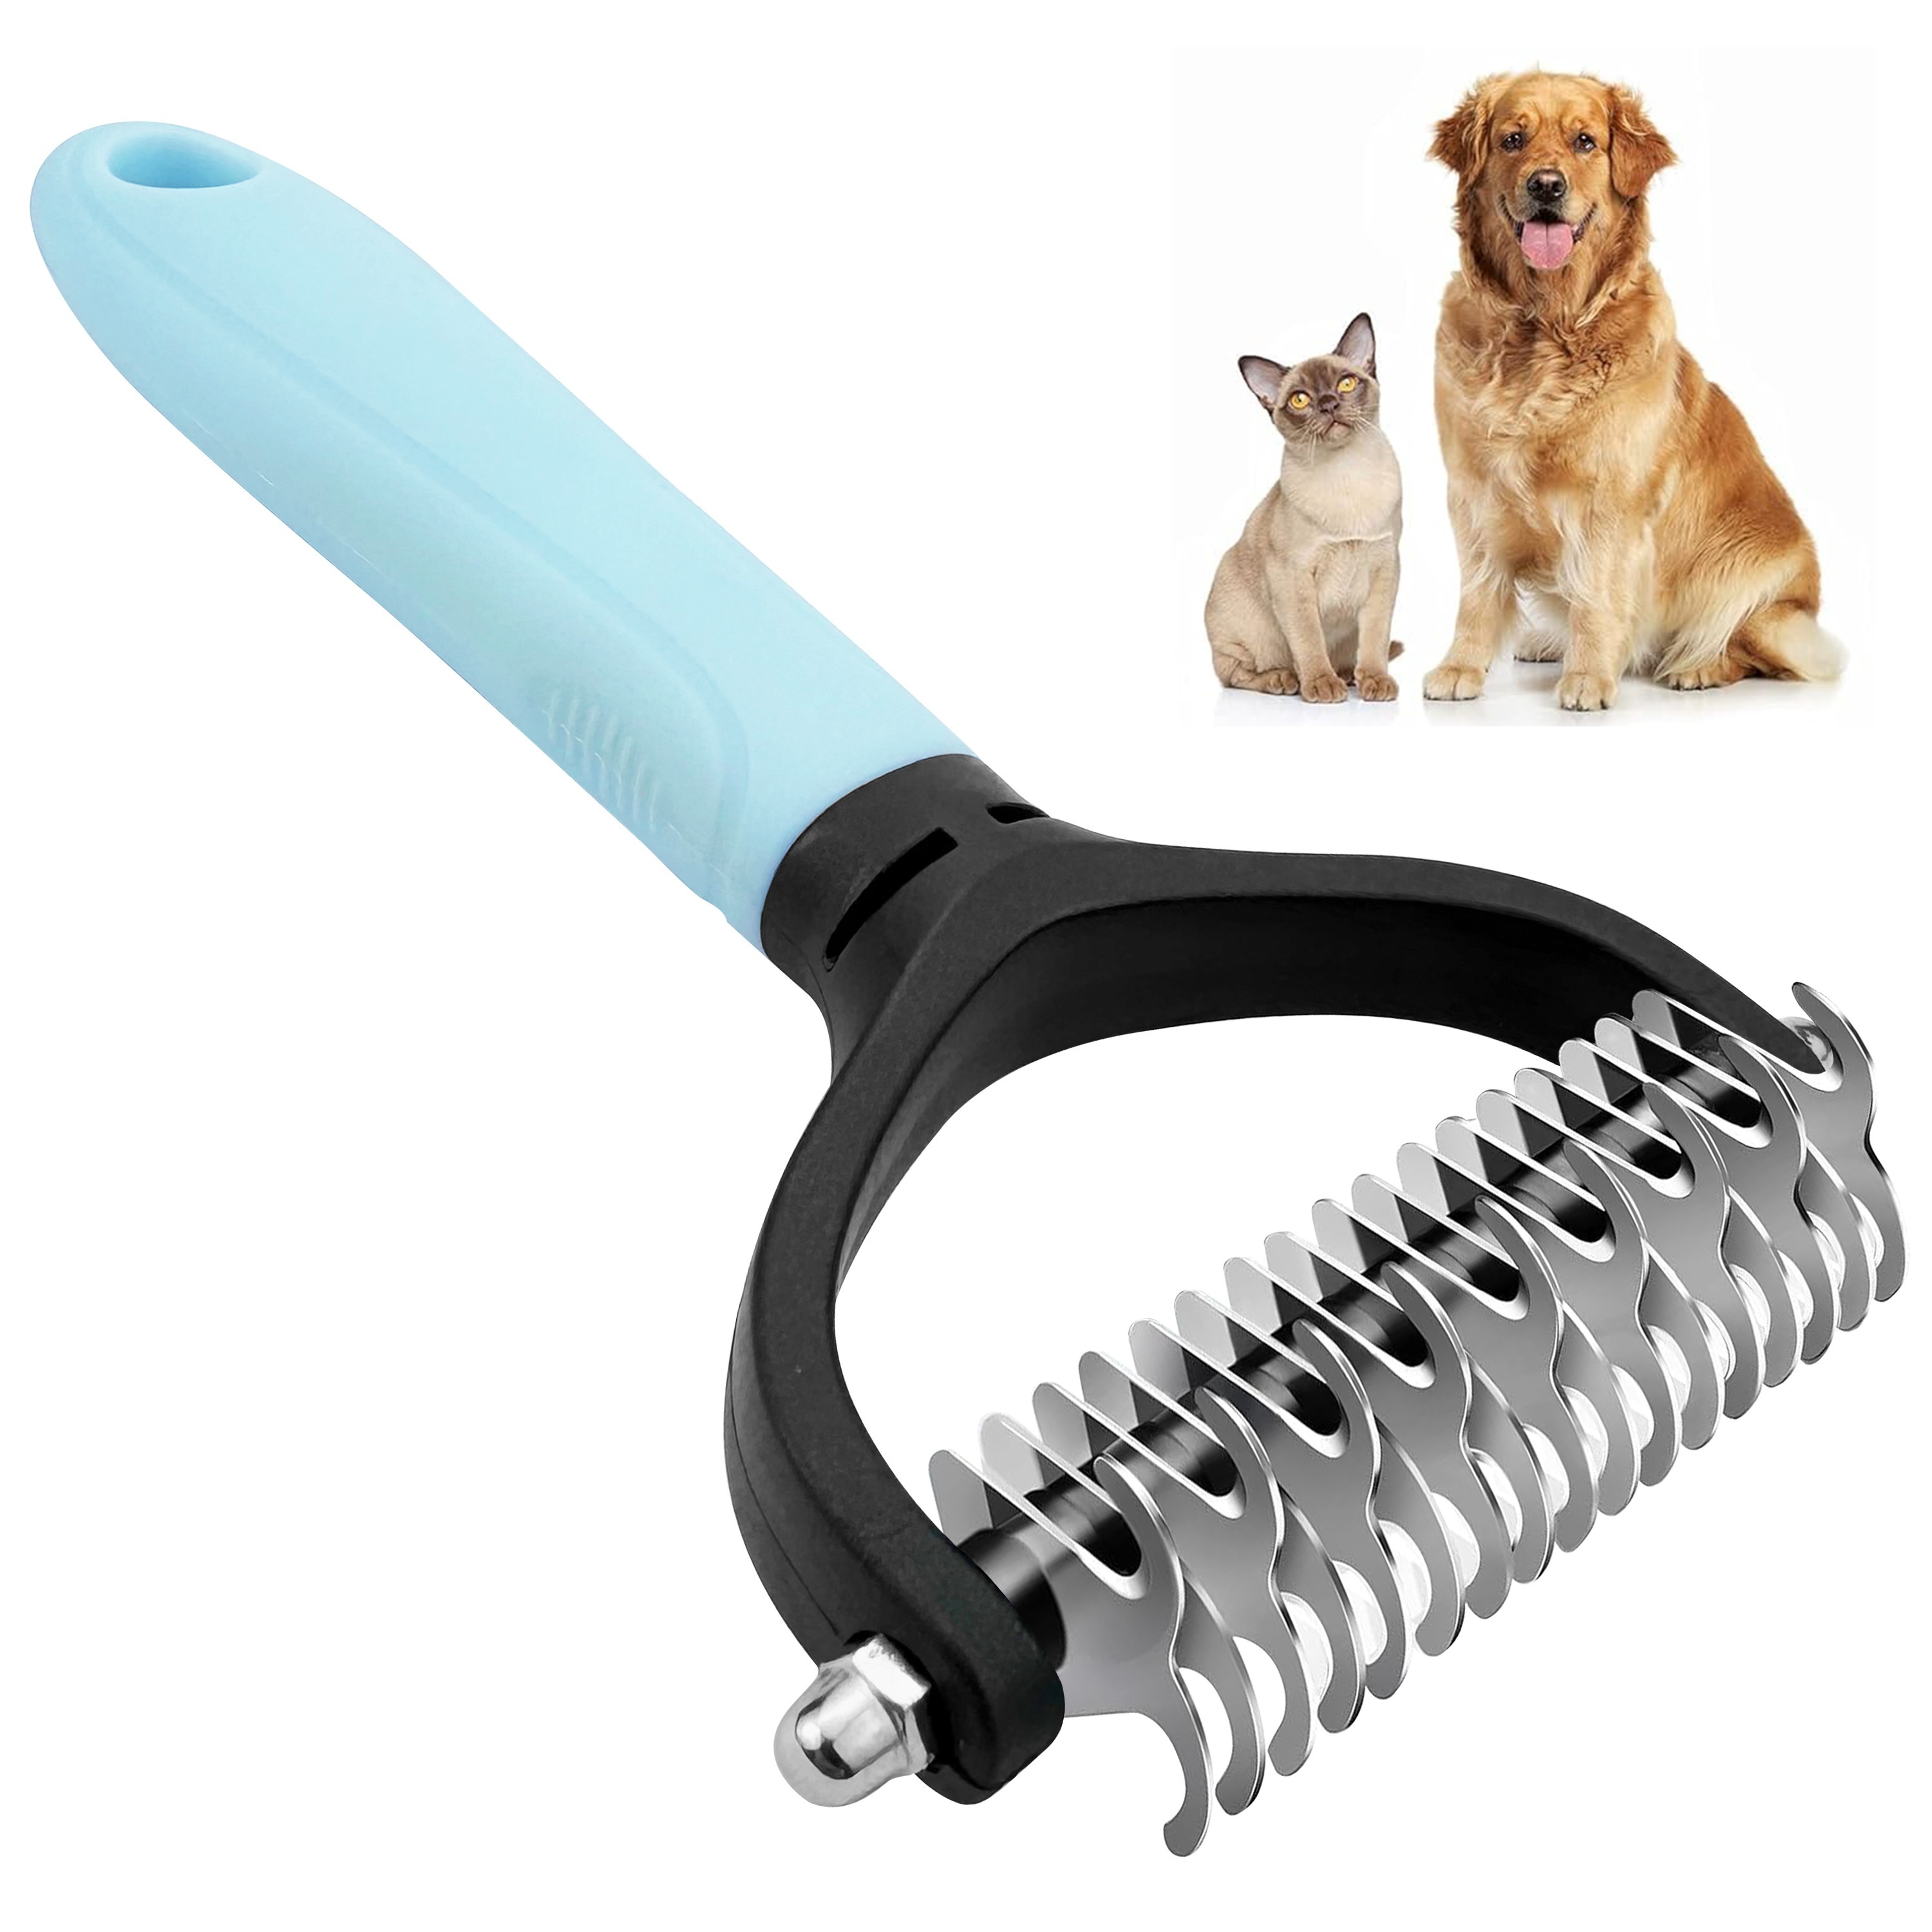 

1pc Pet Grooming Tool, Stainless Steel Dematting Comb, Detangling Rake With Non-slip Handle, Gentle Deshedding Brush For Dogs And Cats, Effective For Long And Thick Coats